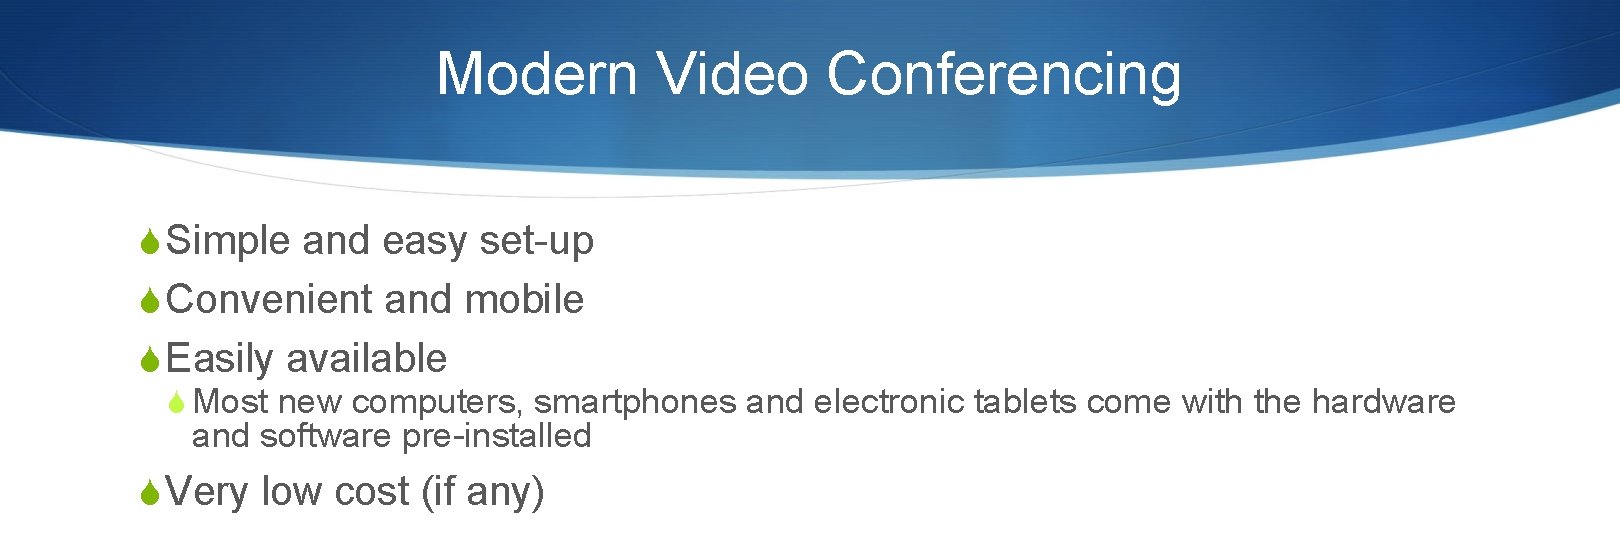 Modern Video Conferencing S Simple and easy set-up S Convenient and mobile S Easily